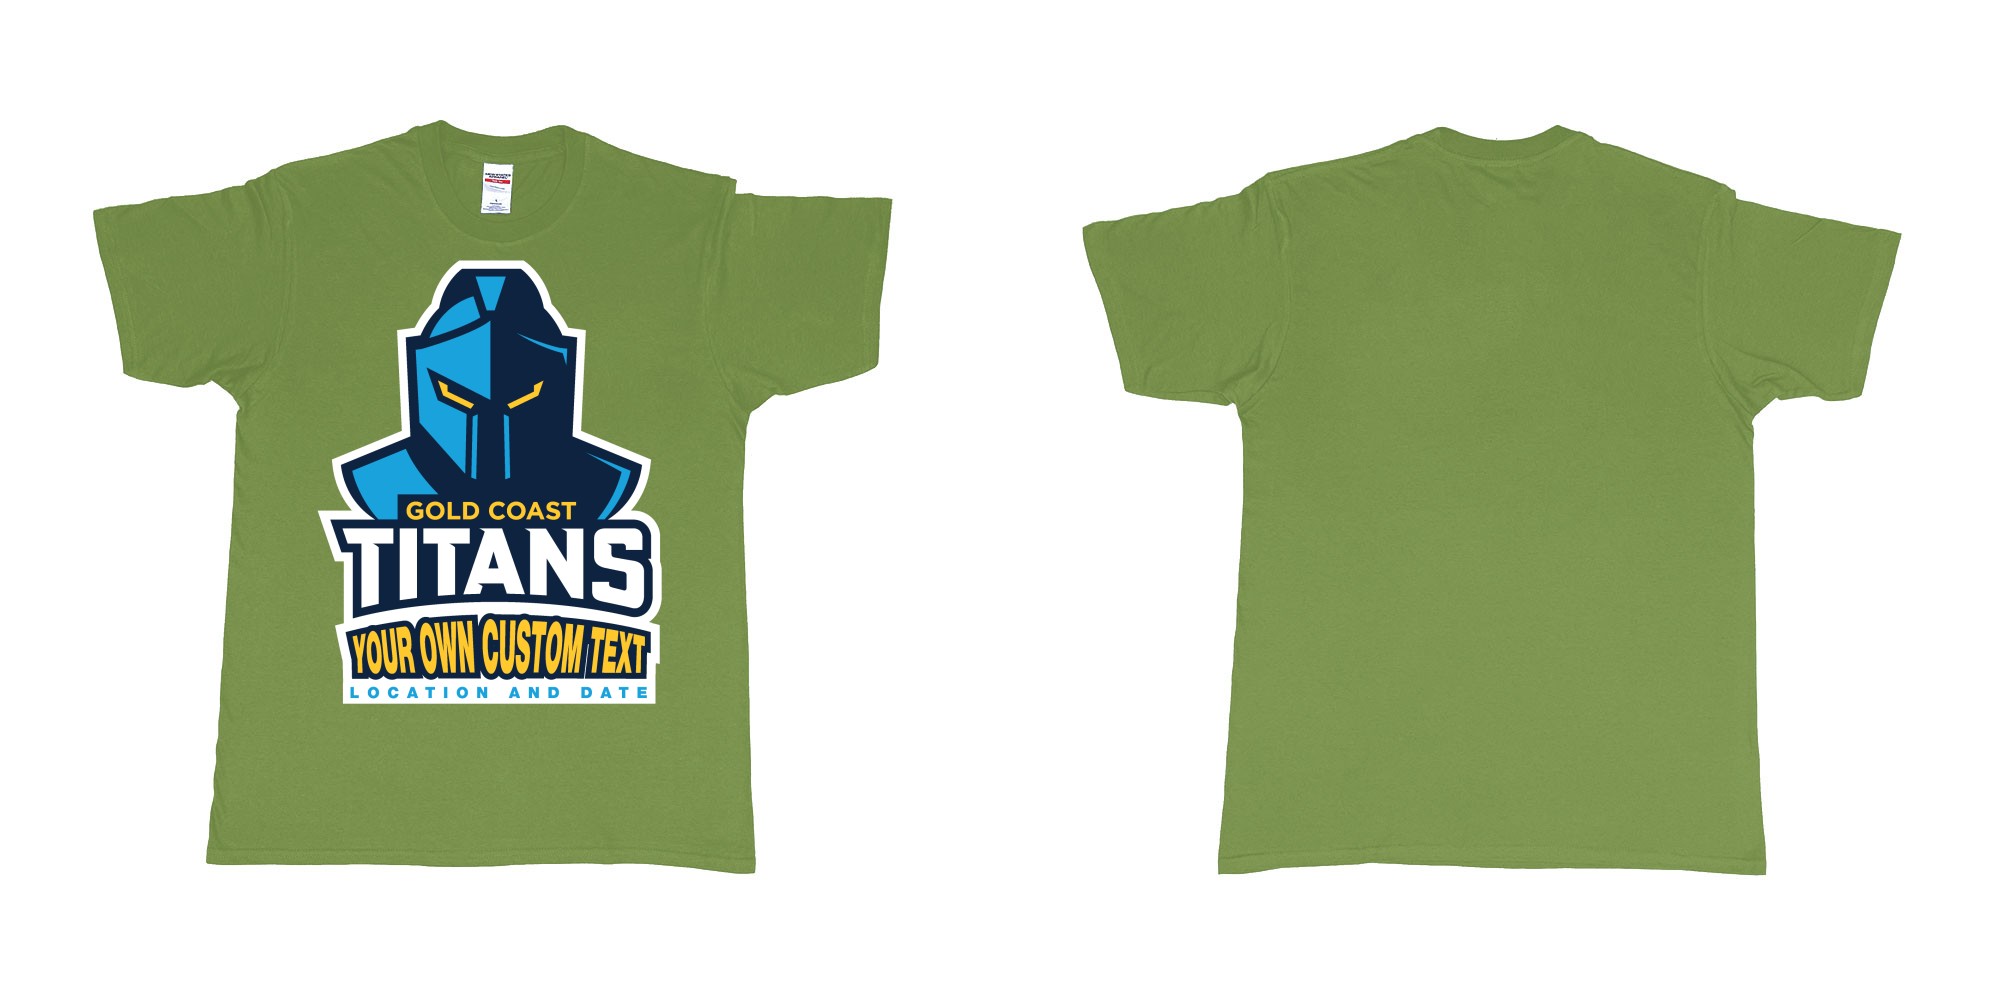 Custom tshirt design gold coast titans own custom design print in fabric color military-green choice your own text made in Bali by The Pirate Way